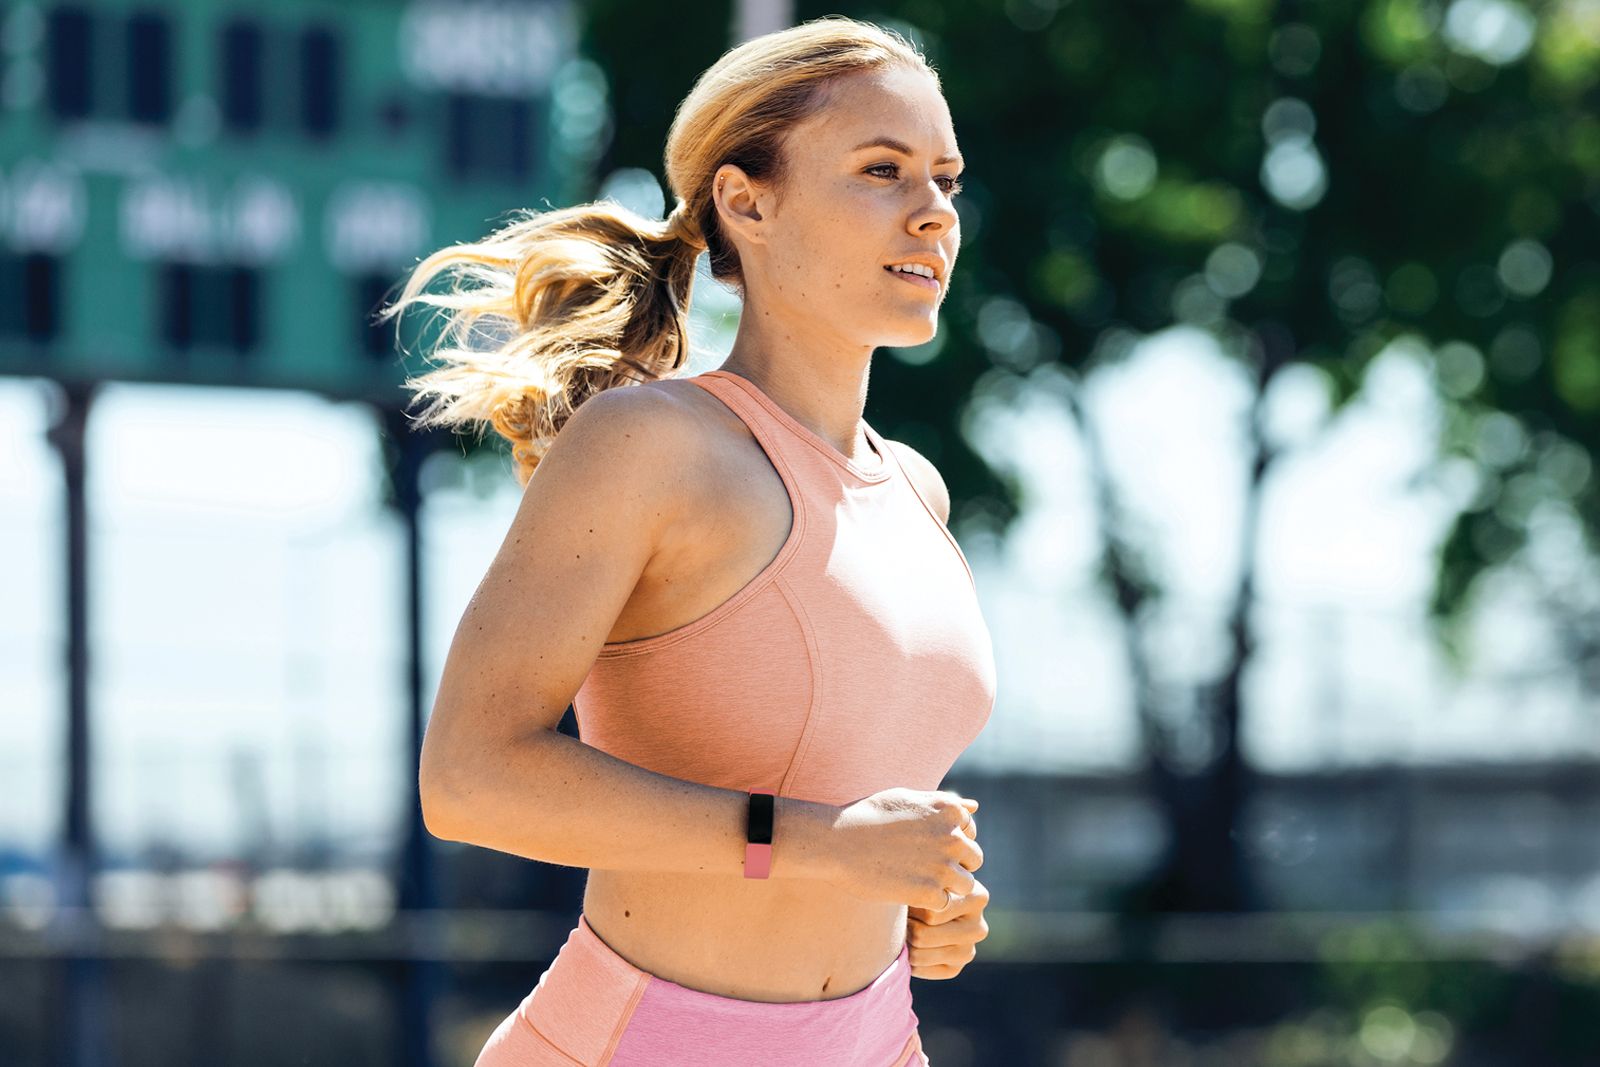 Fitbit Inspire 2 activity tracker updates design and offers 10-day battery life photo 2